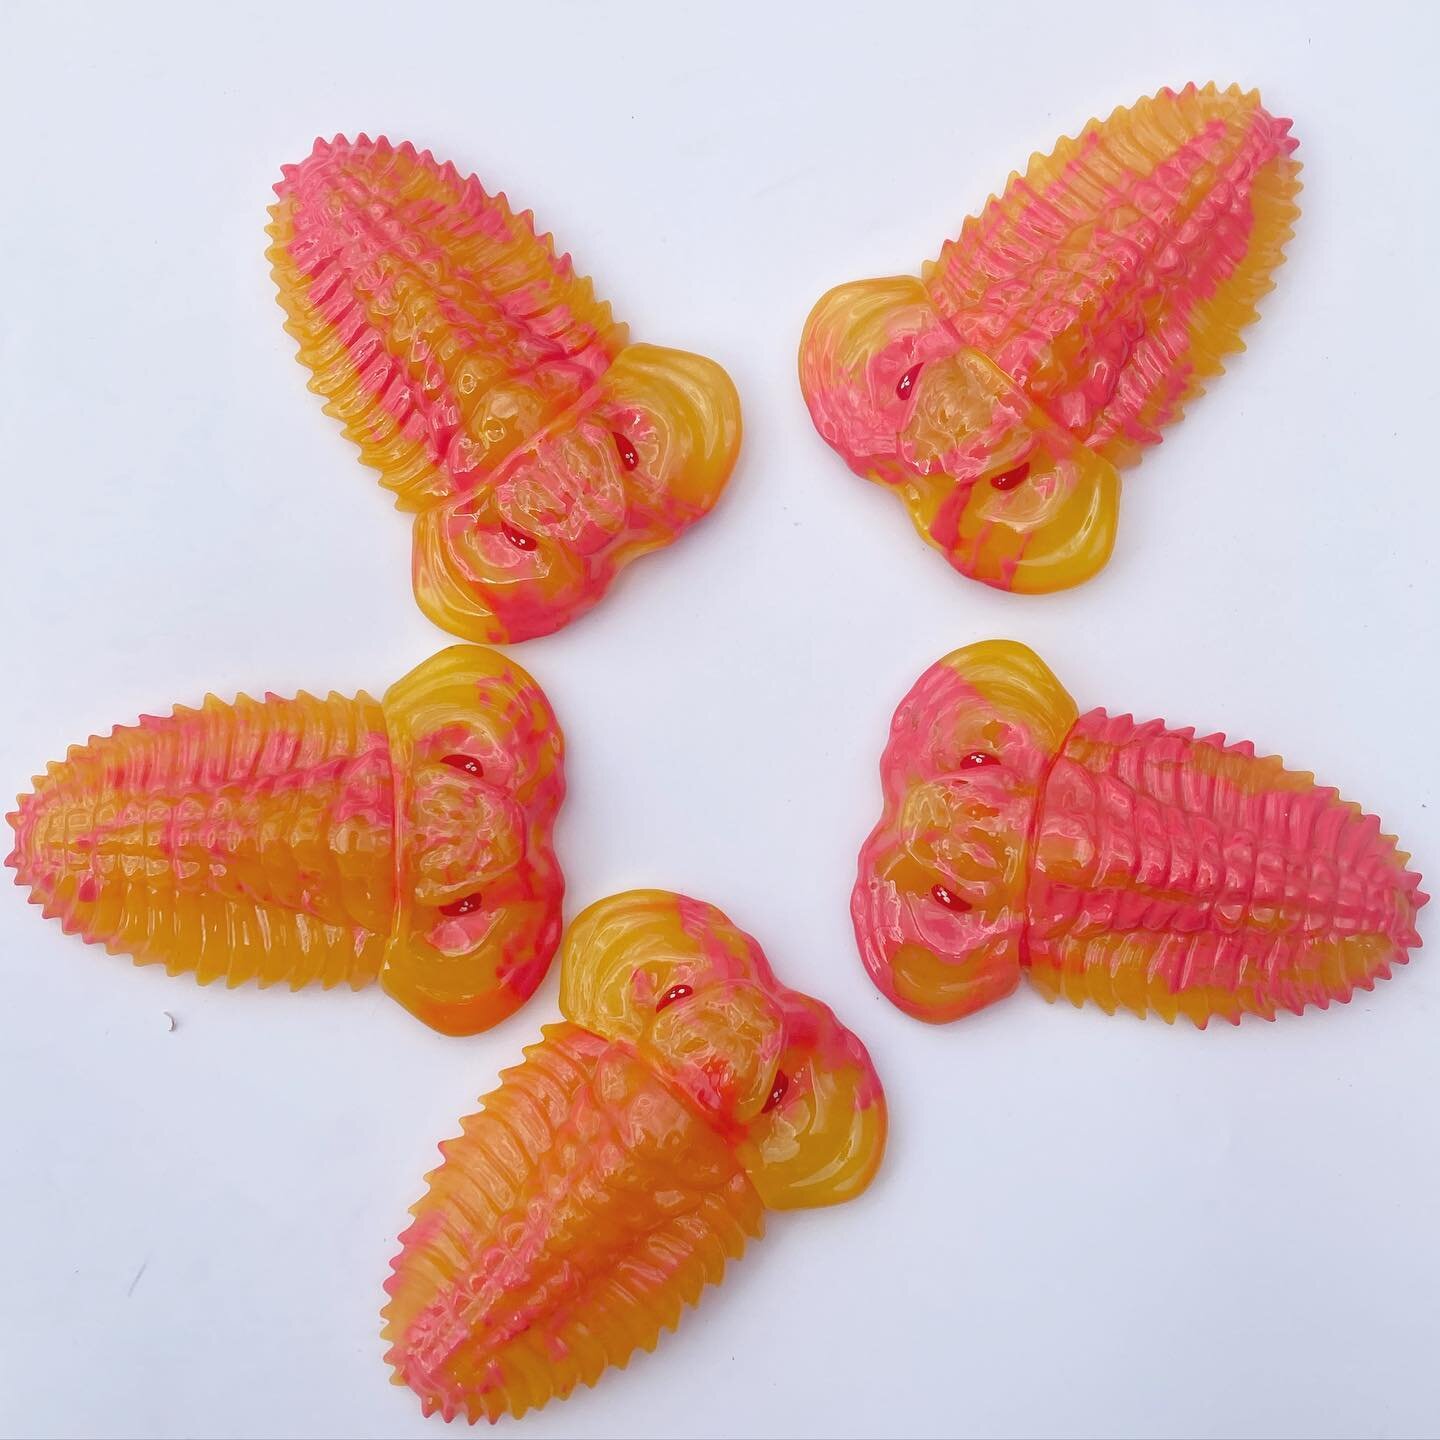 The Official First Drop!
Taffy Pink Amber
$35 shipped 1-5 of 10

These sofubi trilobites are translucent amber accented by bright taffy-pink swirls with a candy gloss top coat. 

As each one is slightly different comment the photo number you want to 